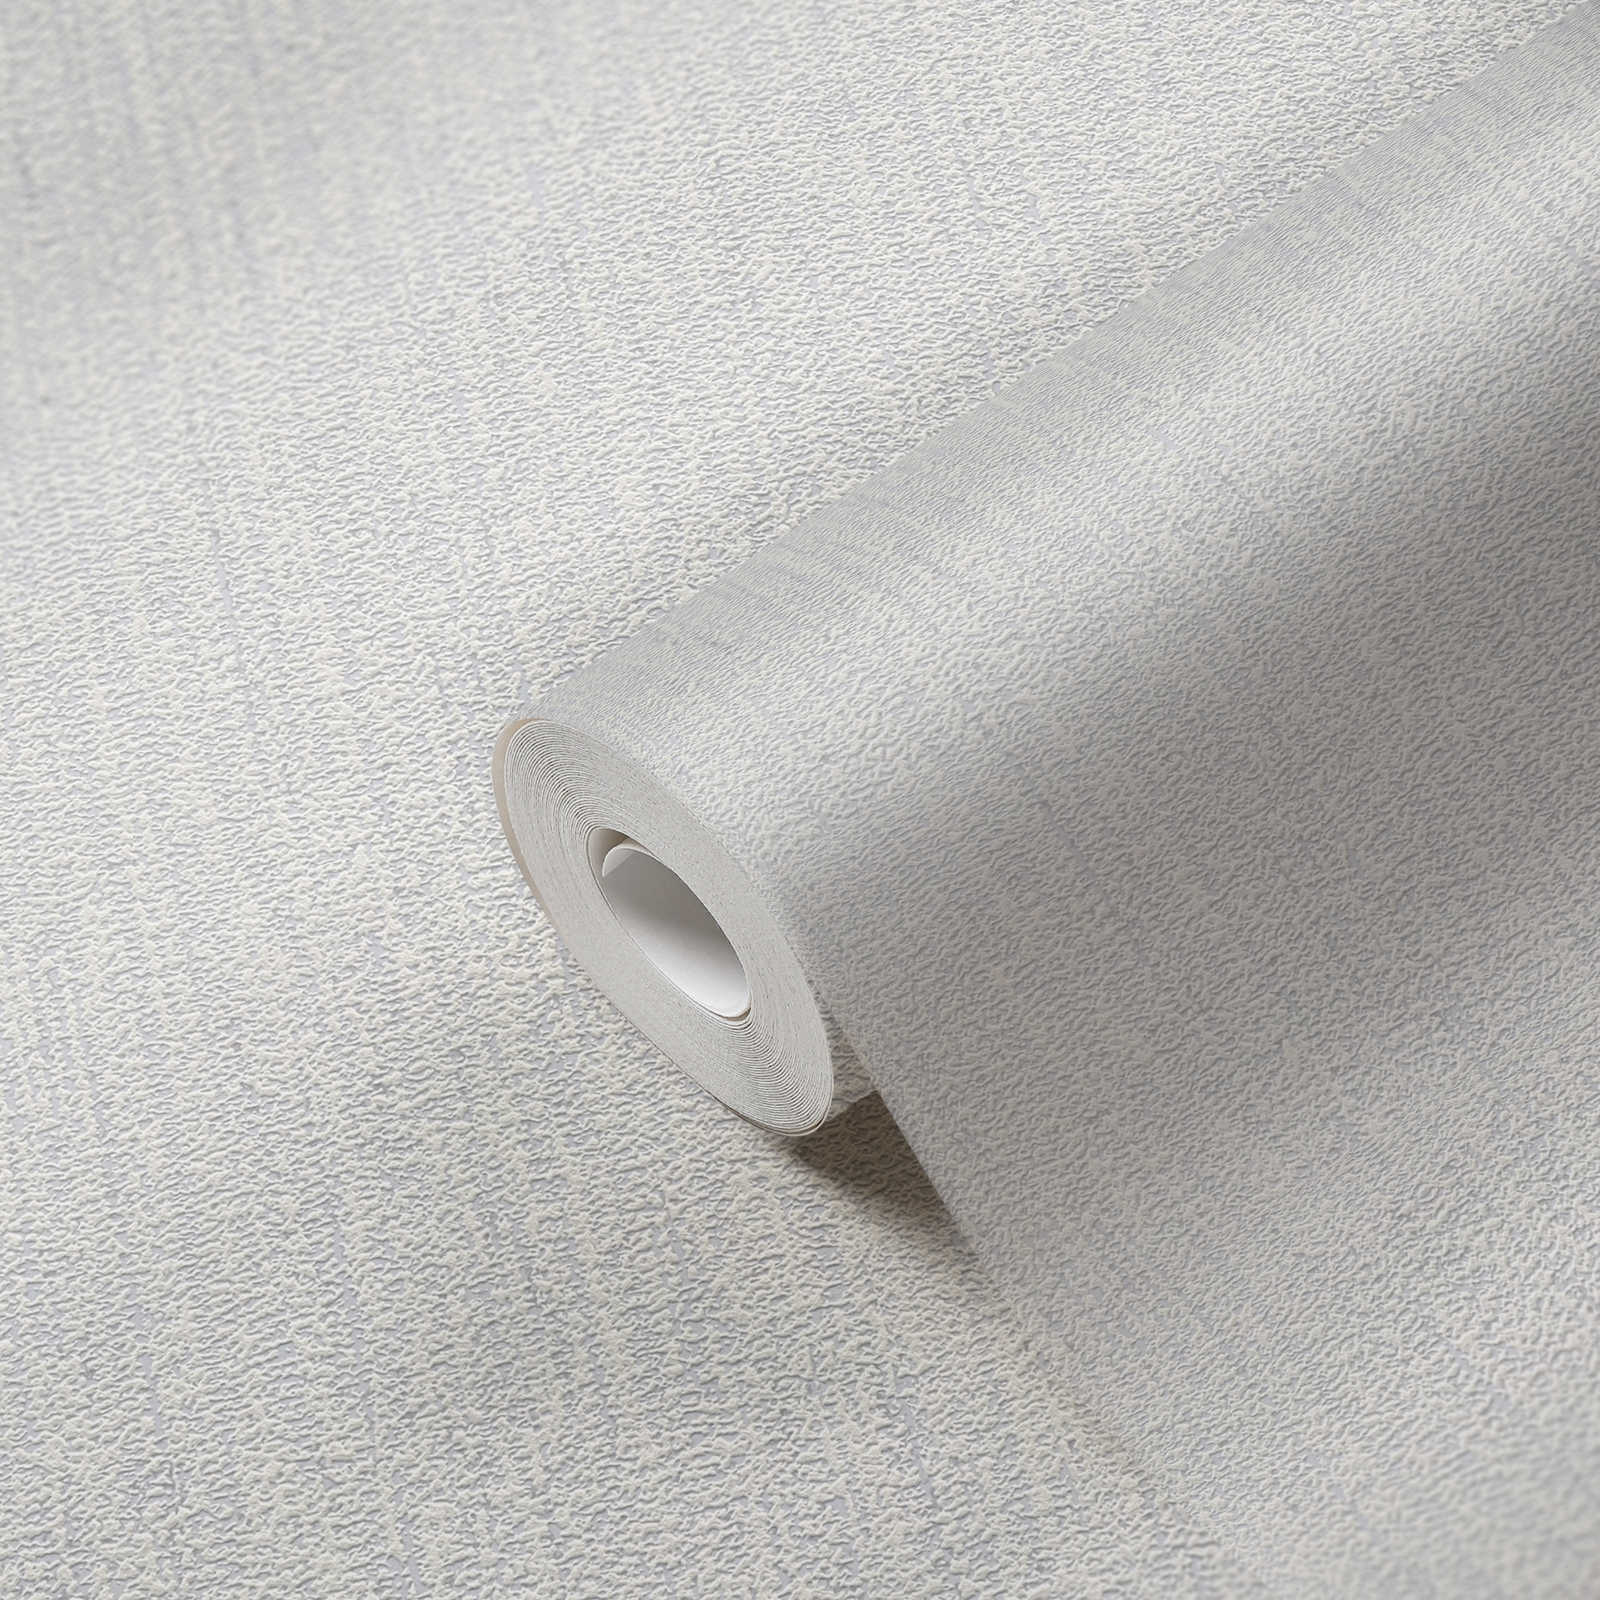             Plain wallpaper with fabric structure - white, light grey
        